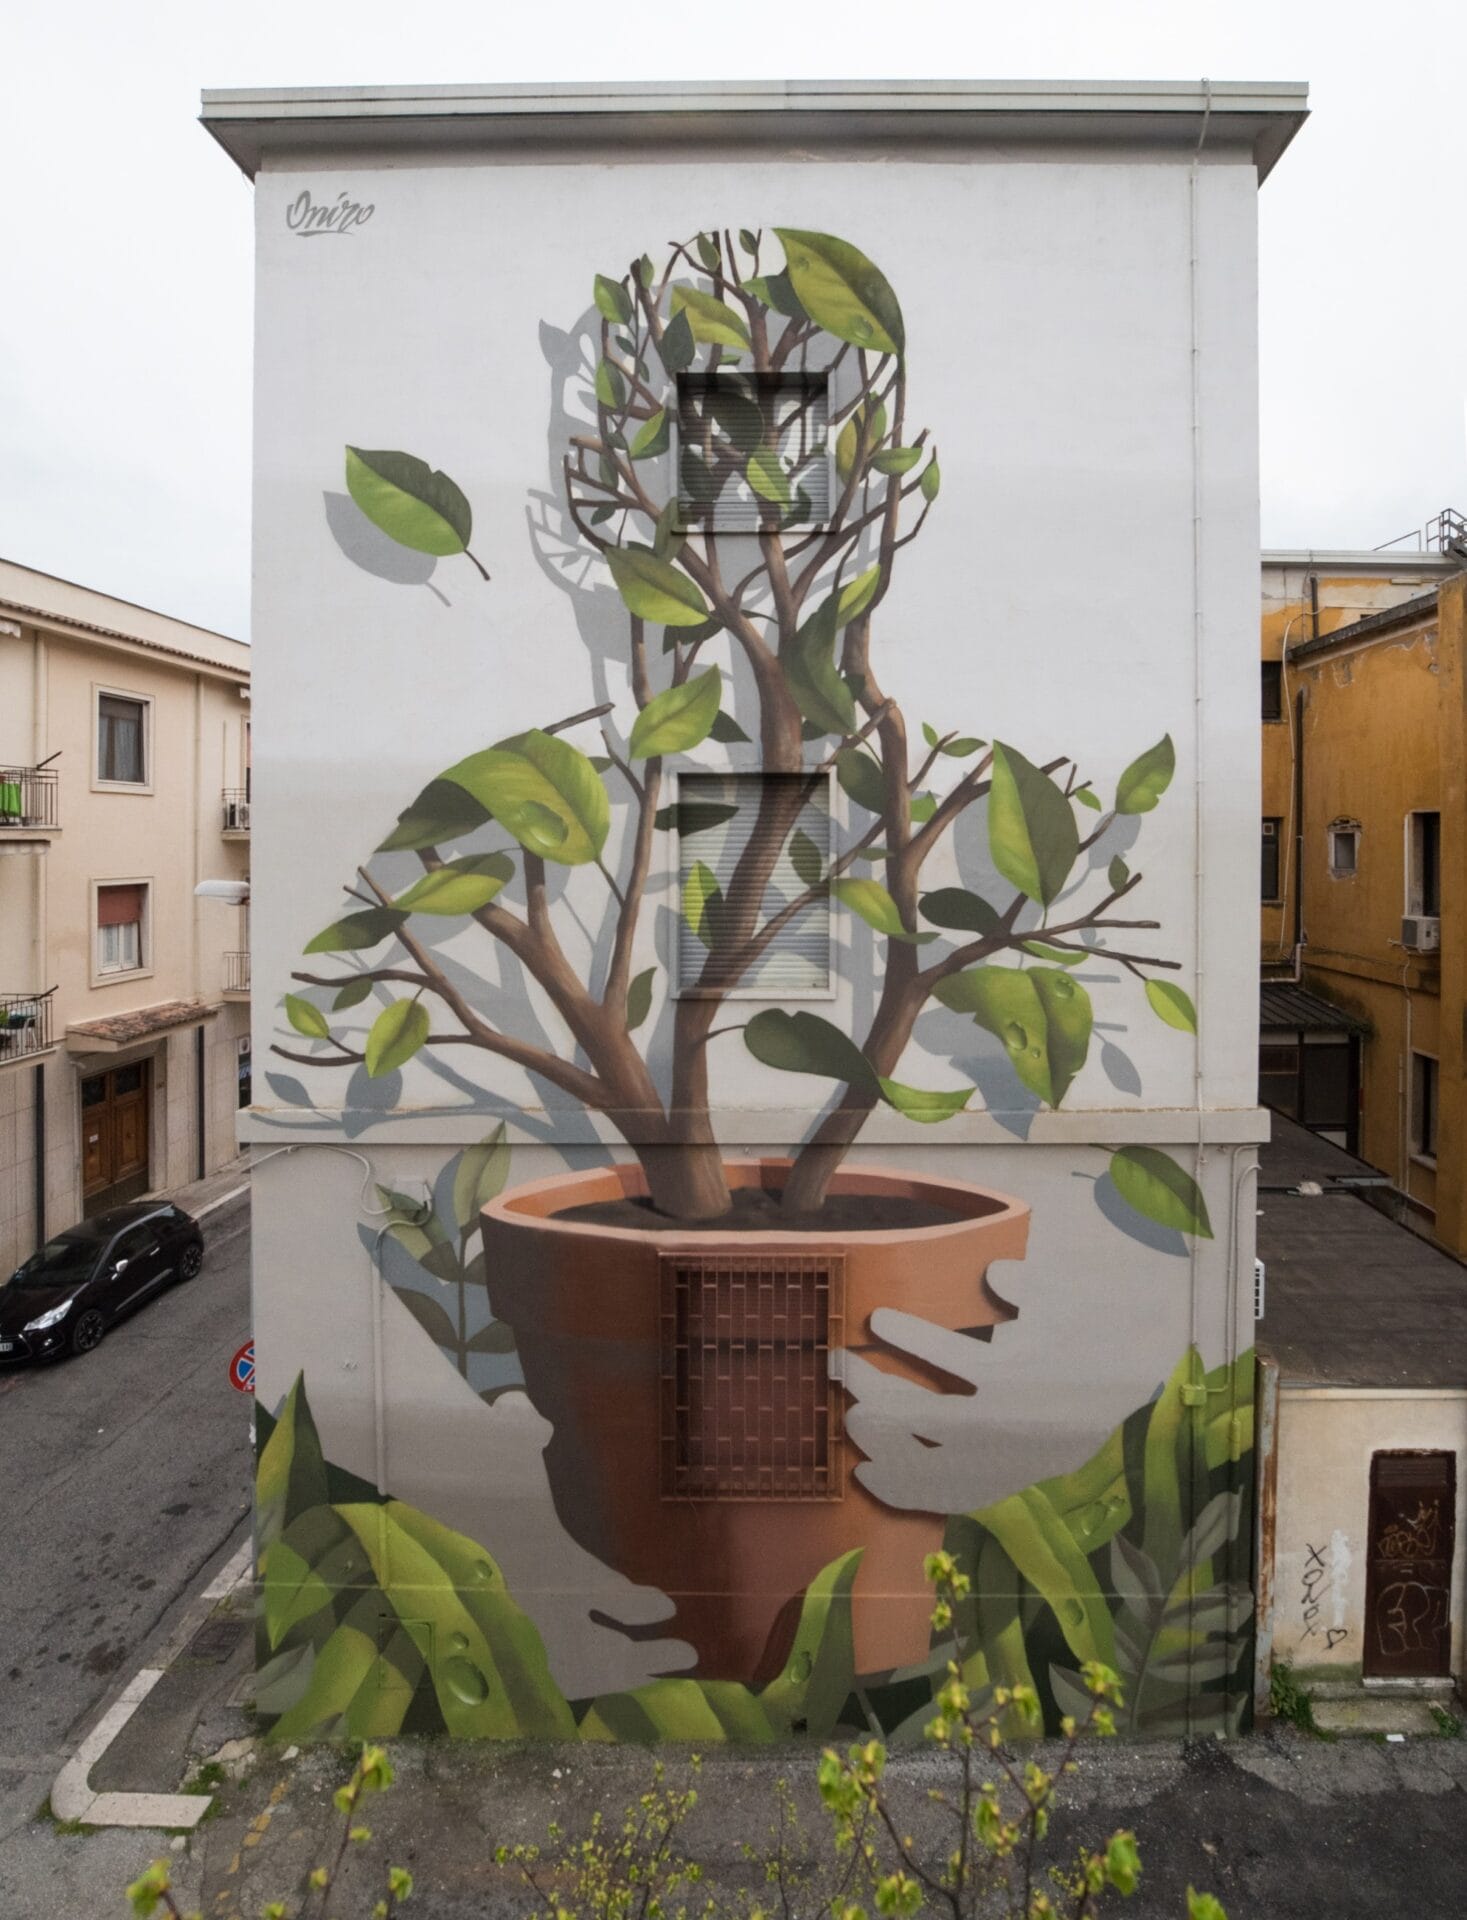 Verdant Landscapes and Burgeoning Plants Crawl Across Walls in ONIRO’s Vibrant Anatomical Murals